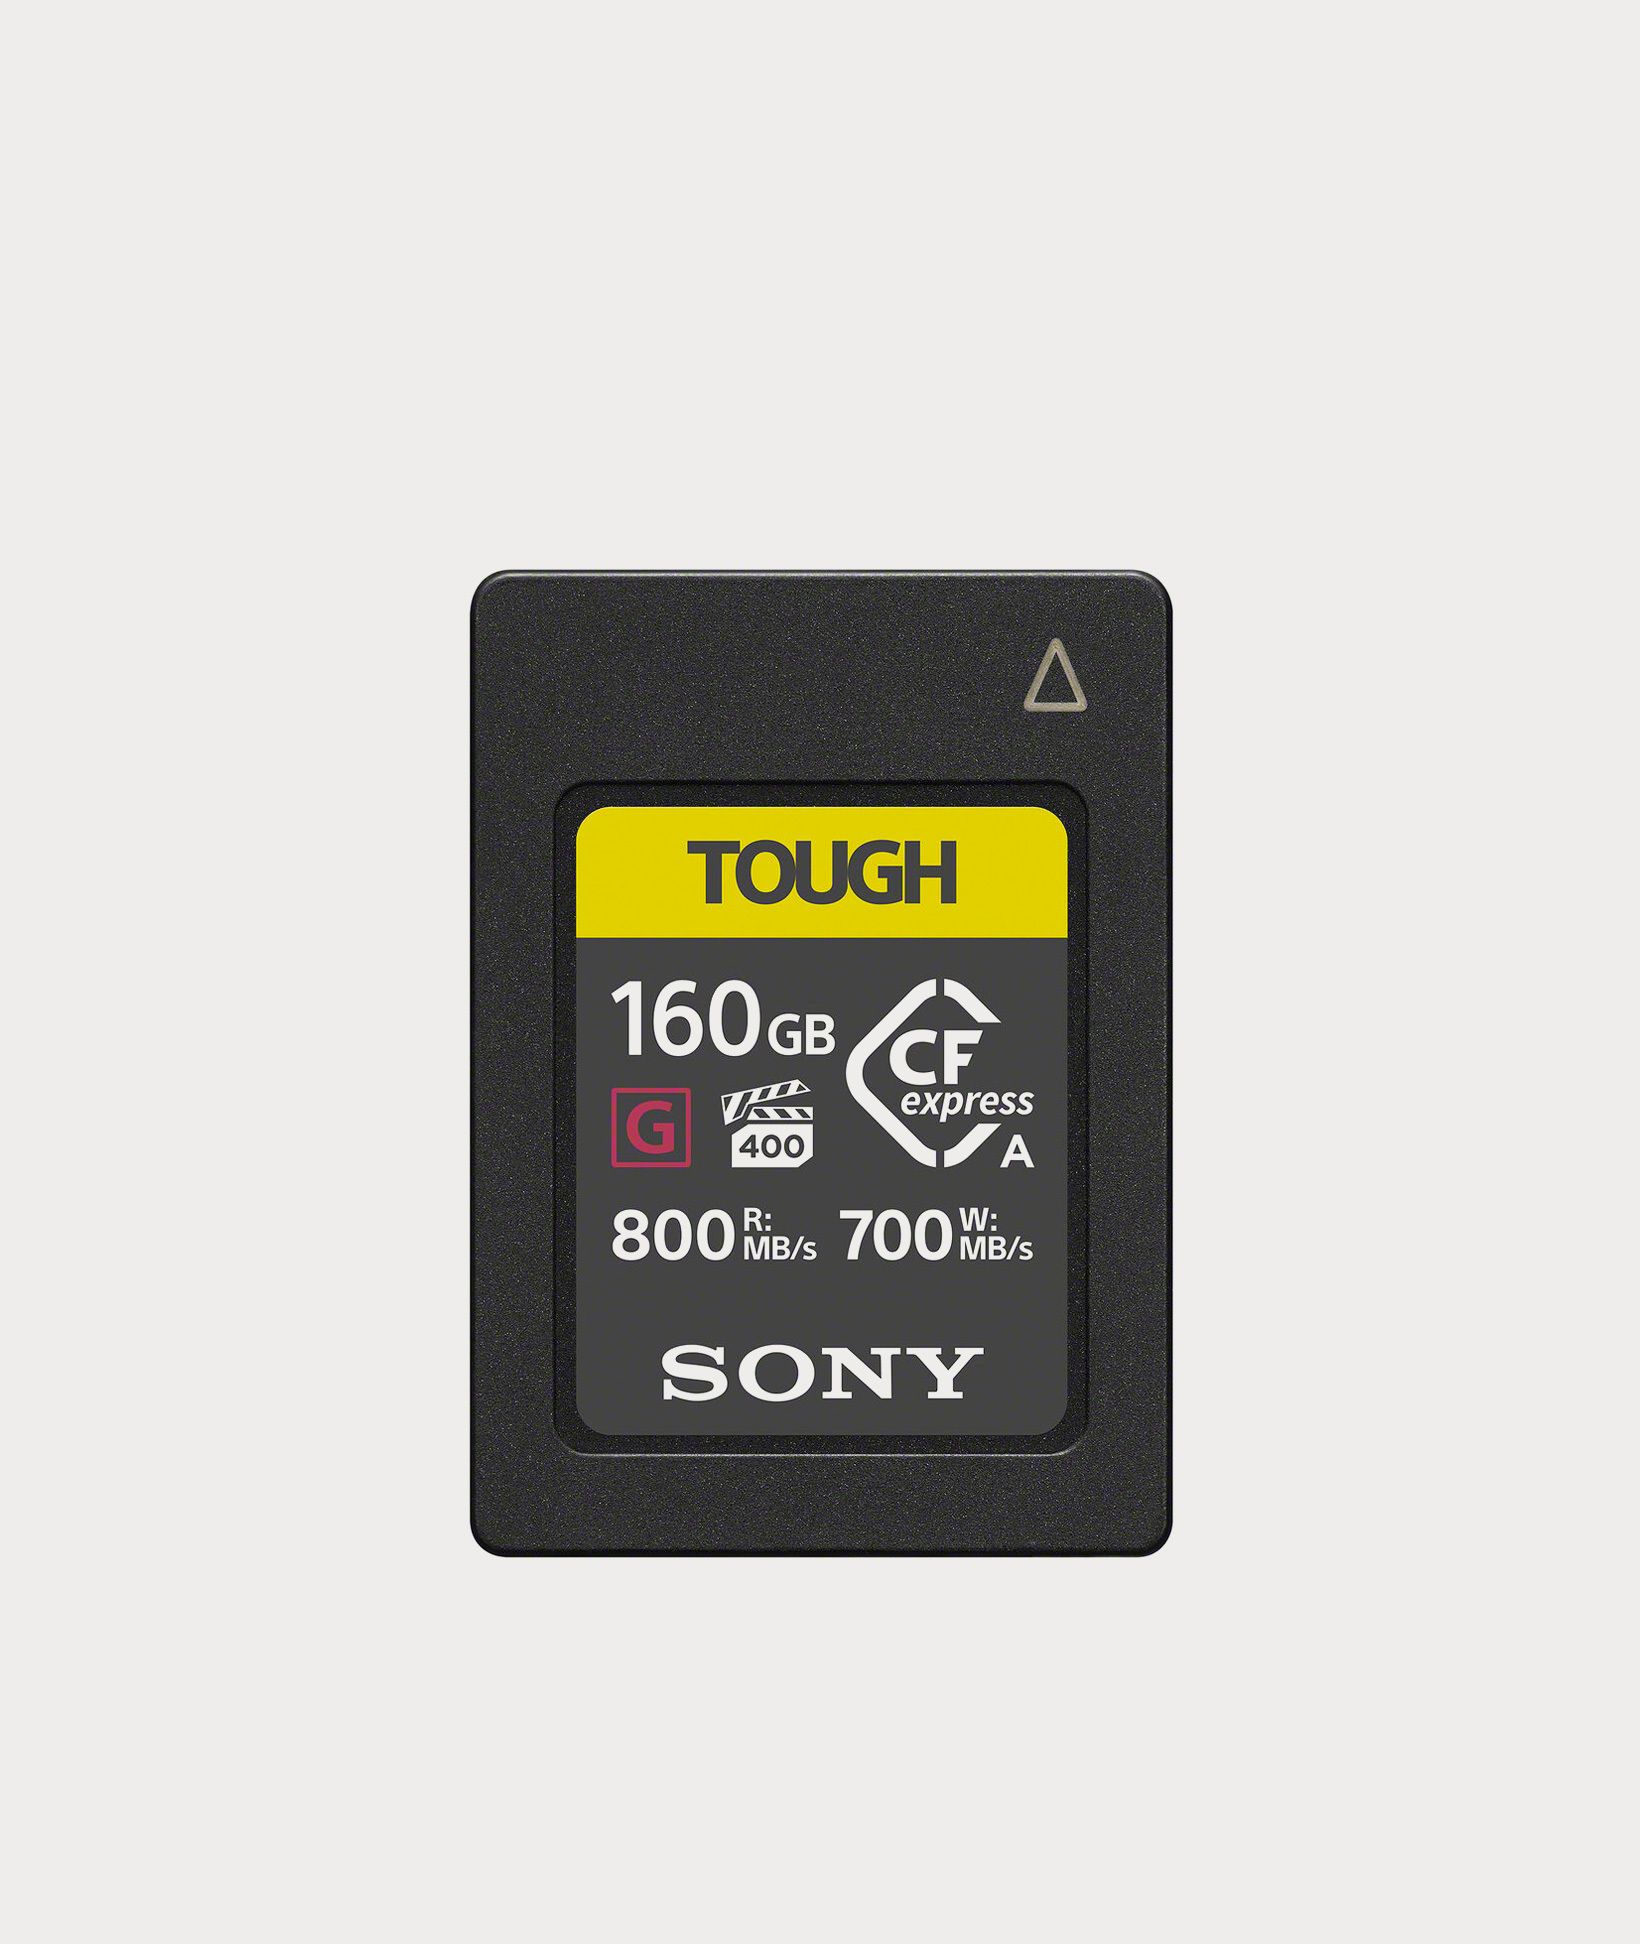 Sony CFexpress Type A Memory Card - 160GB